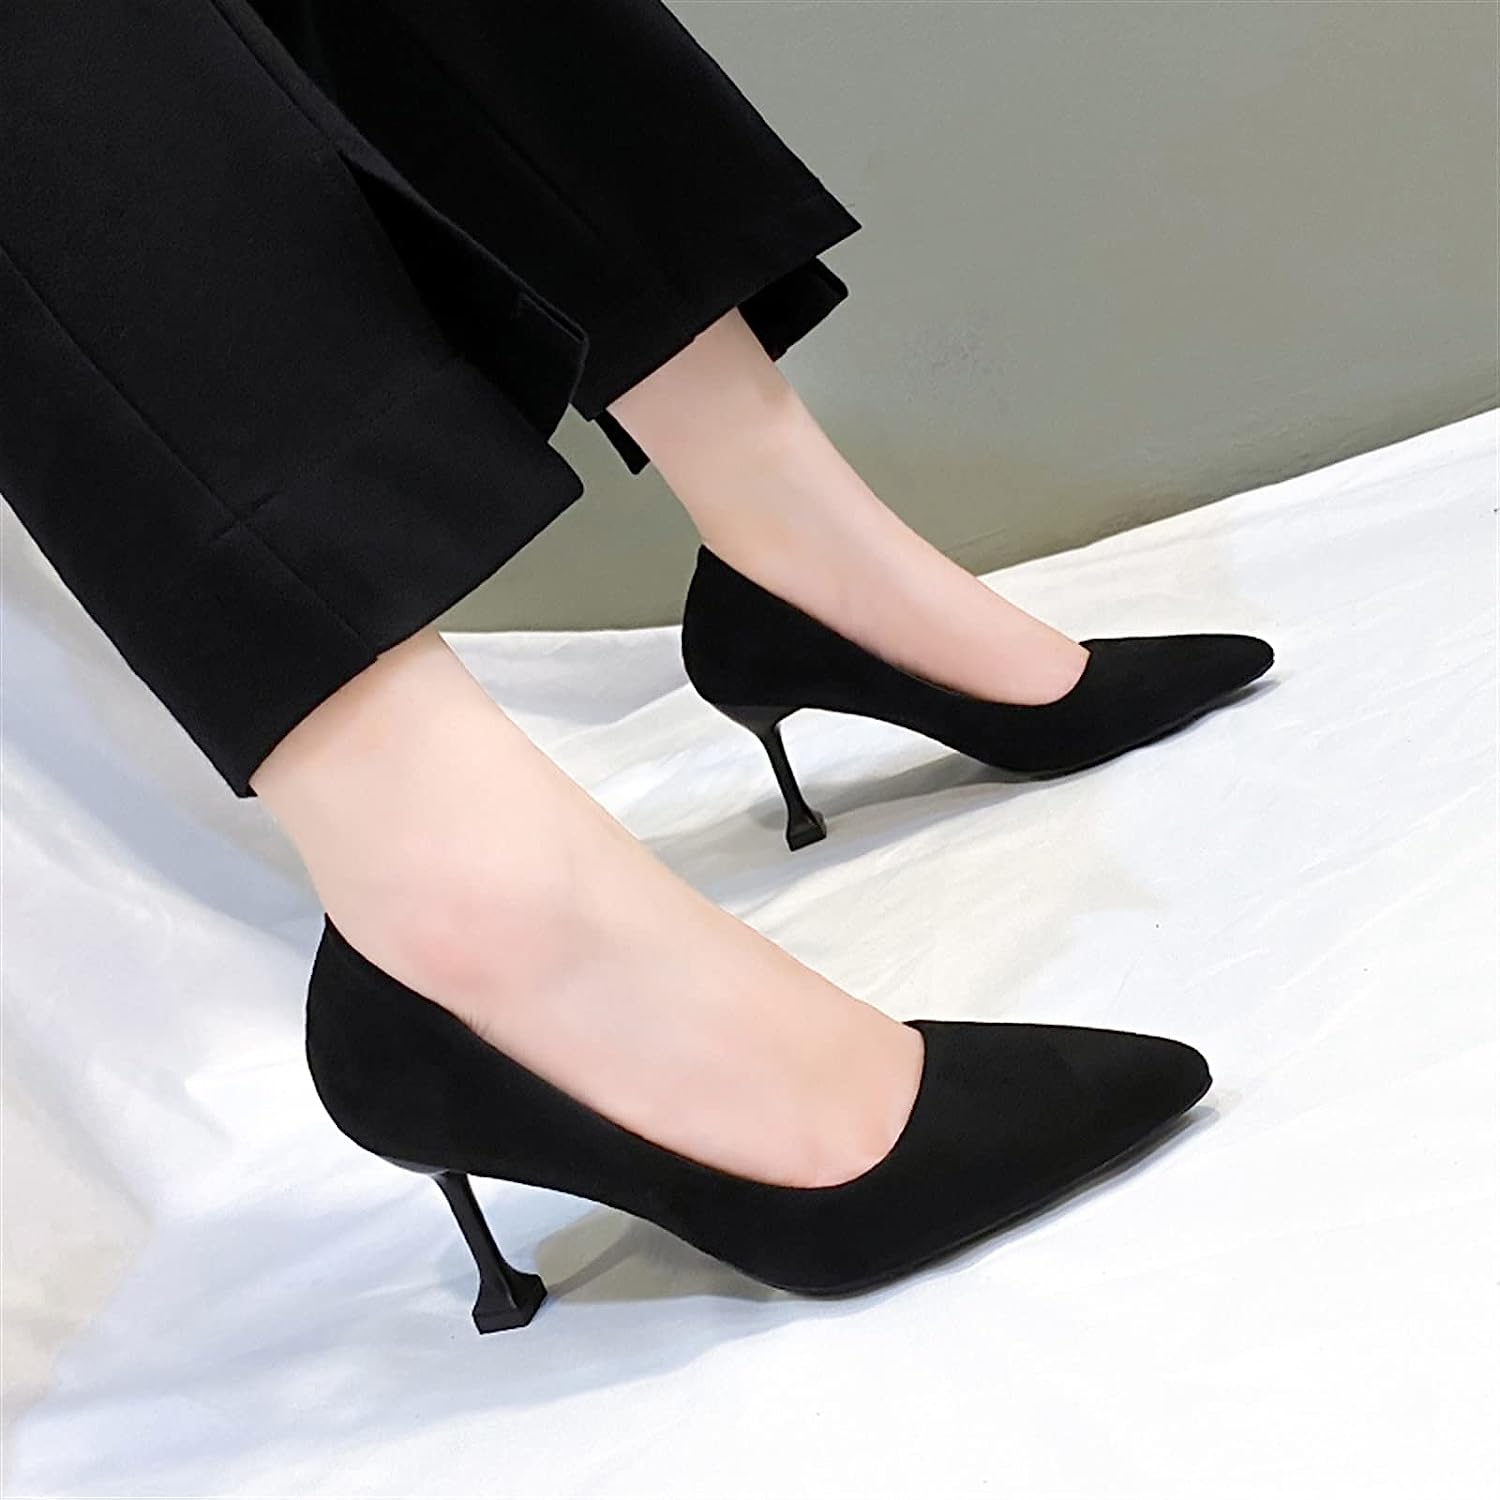 High Heels for Women, Color Sole Square Heel Black Suede Women's Wedding Dress Shoes Thin Heel Pointed Shallow Mouth Women's Heel Shoes (Color : Black, Size : 2.5 UK)